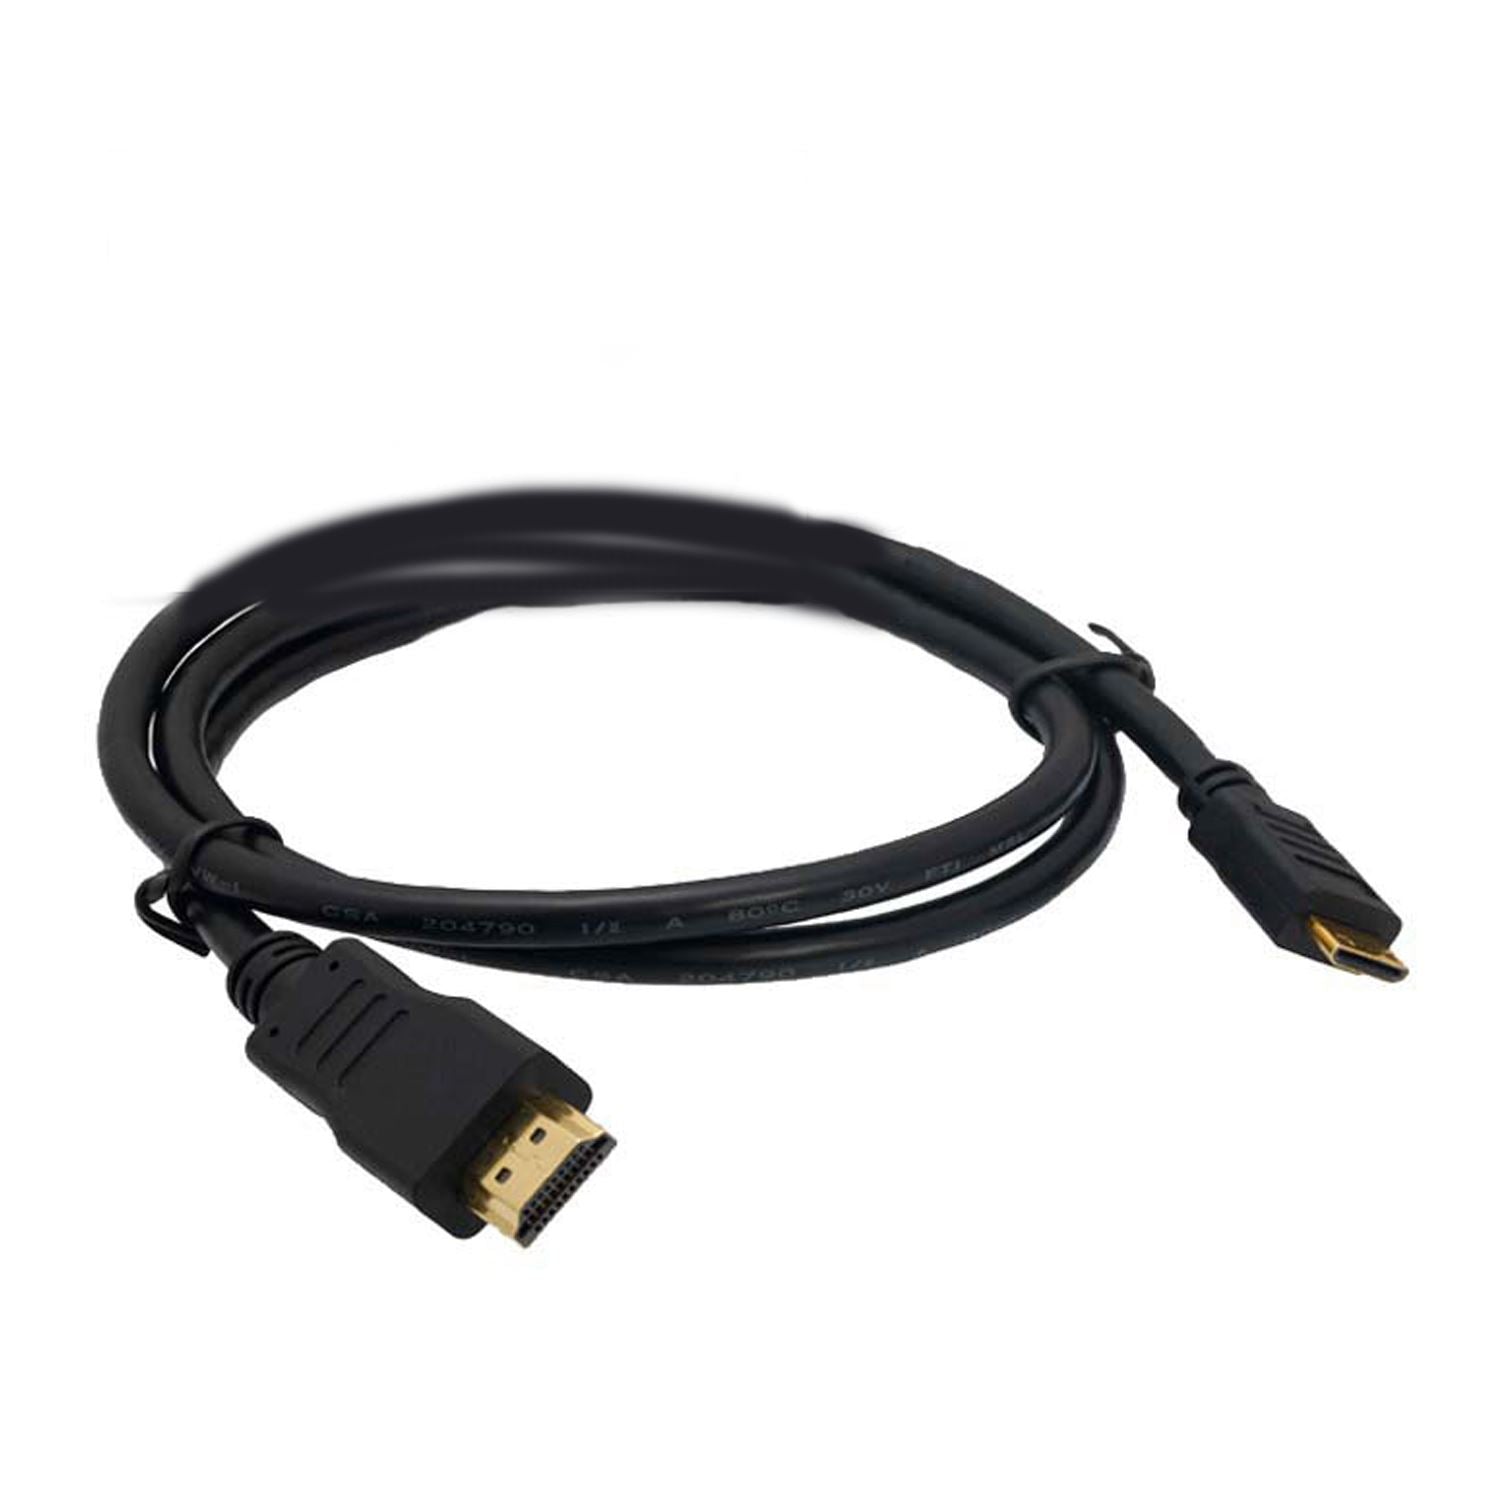 5m HDMI to Mini HDMI Cable Compatible With Set-Top Boxes,DVDs,PC's & Digital TVs